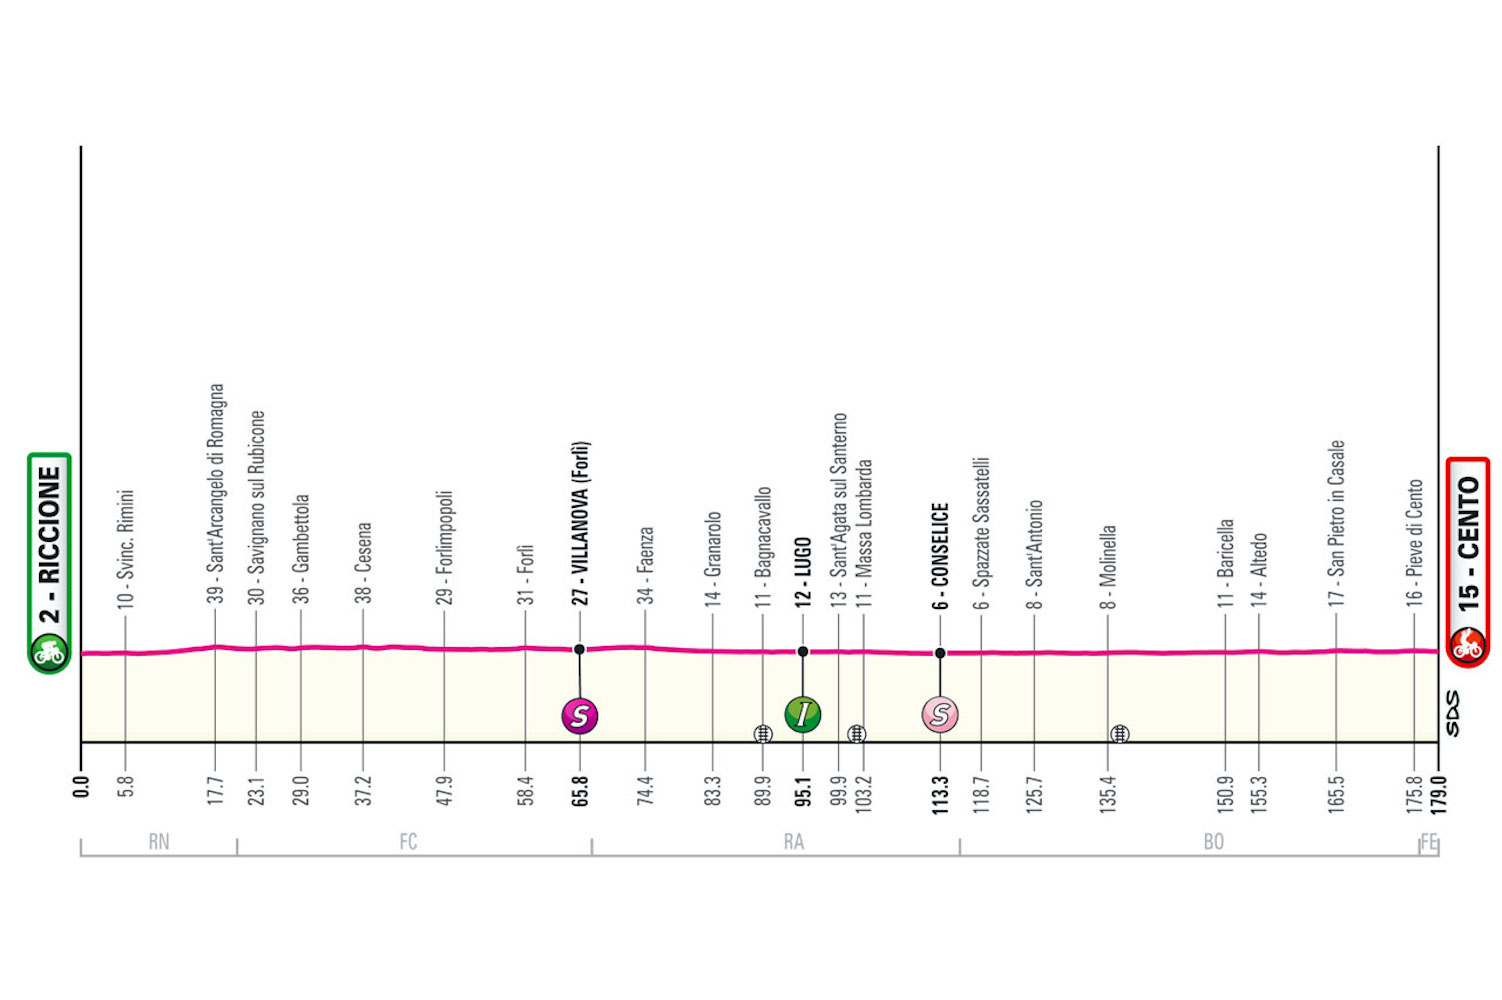 The route of stage 13 of the Giro d'Italia.